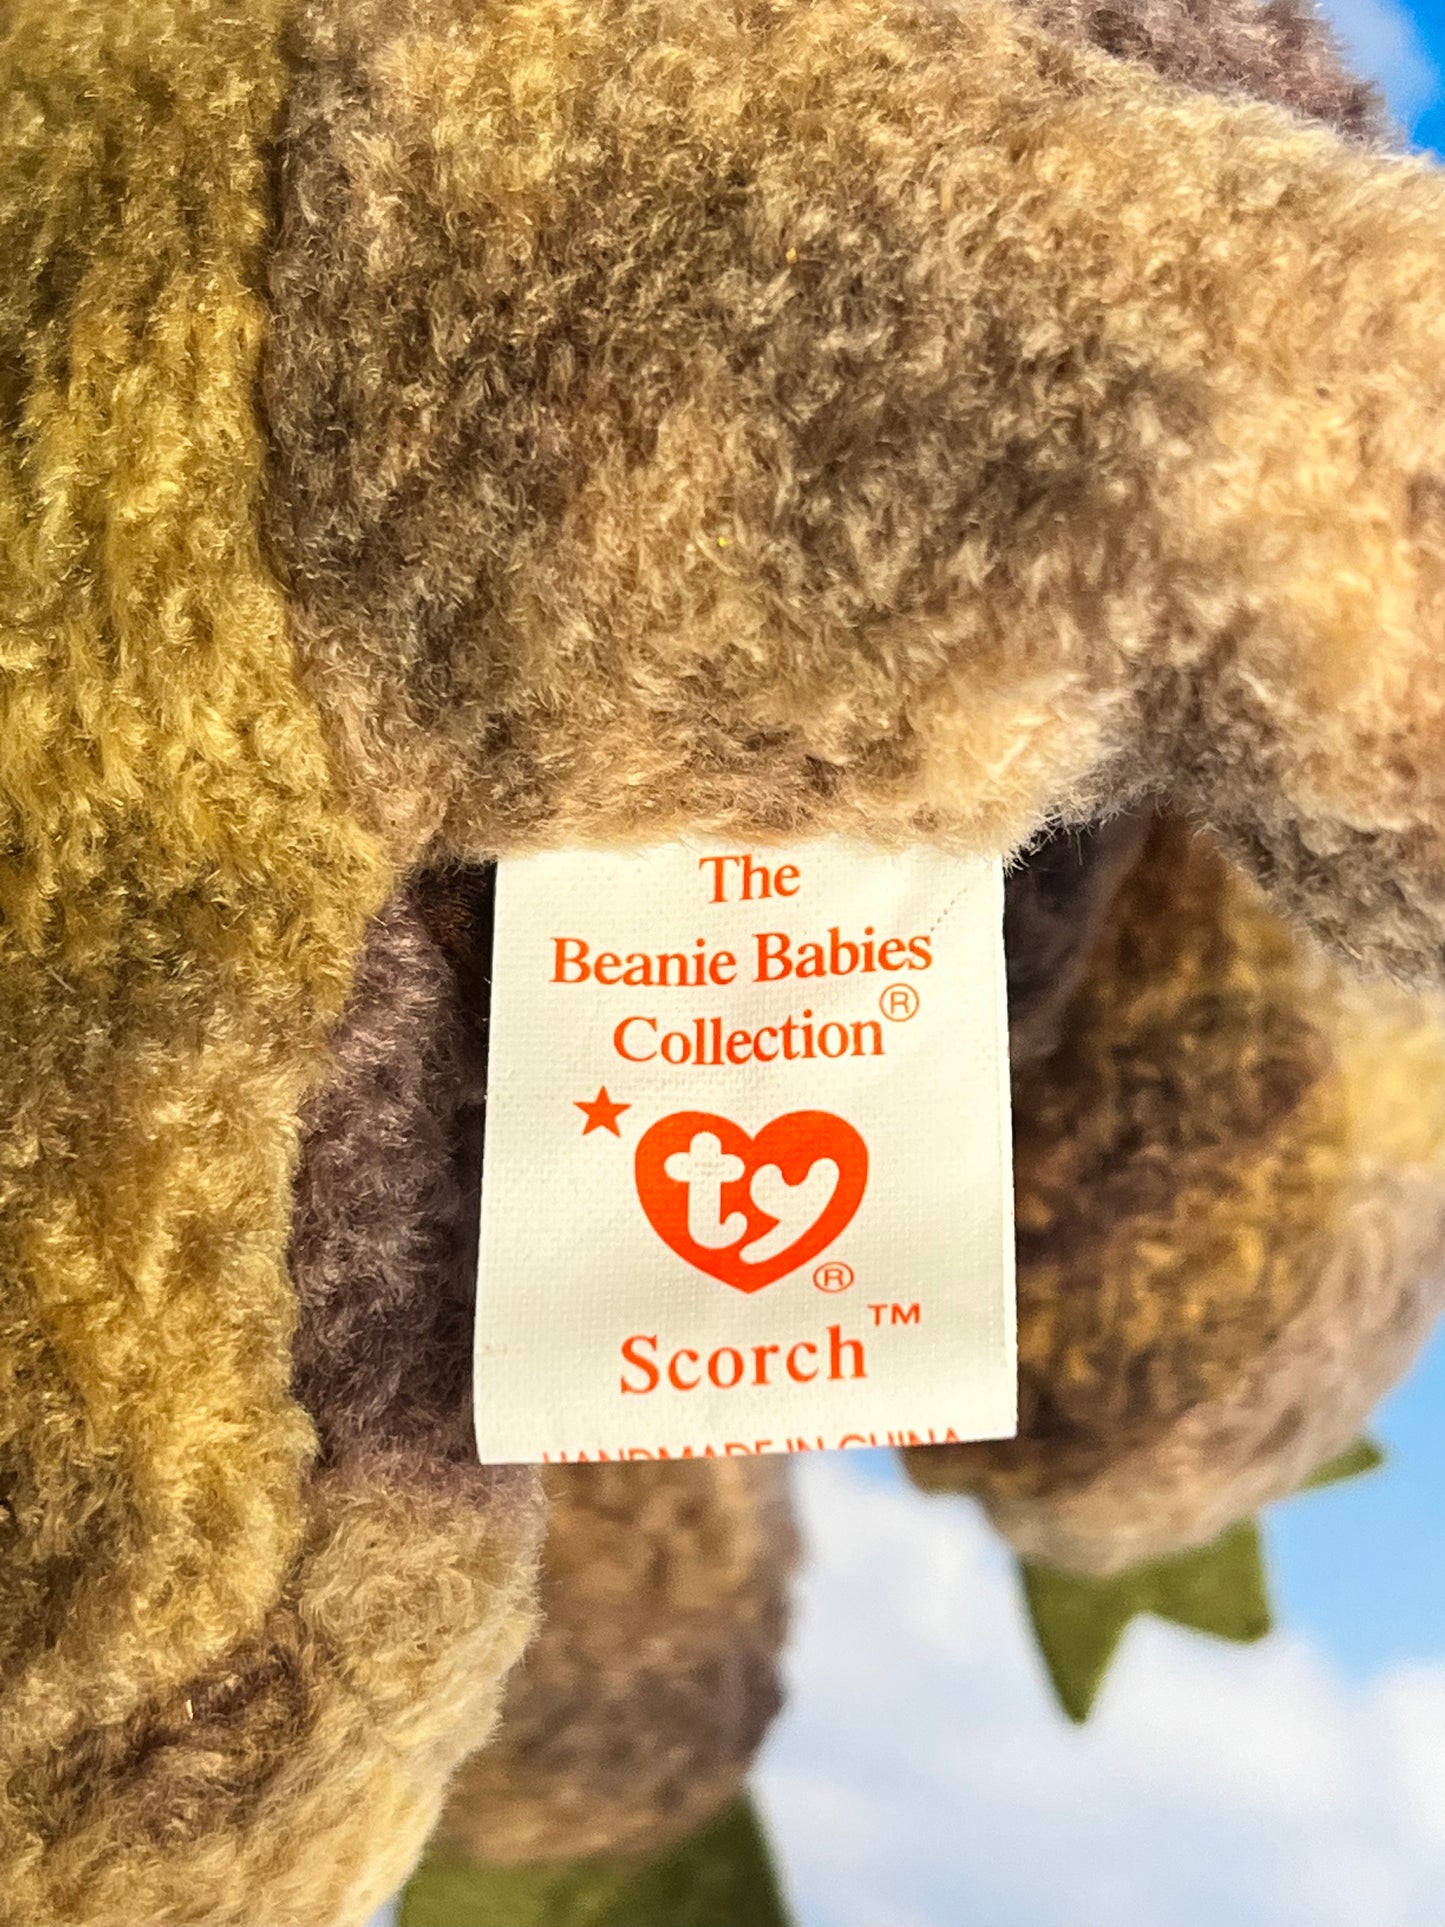 Ty Beanie Babies “Scorch“ The Dragon, July 31 1998